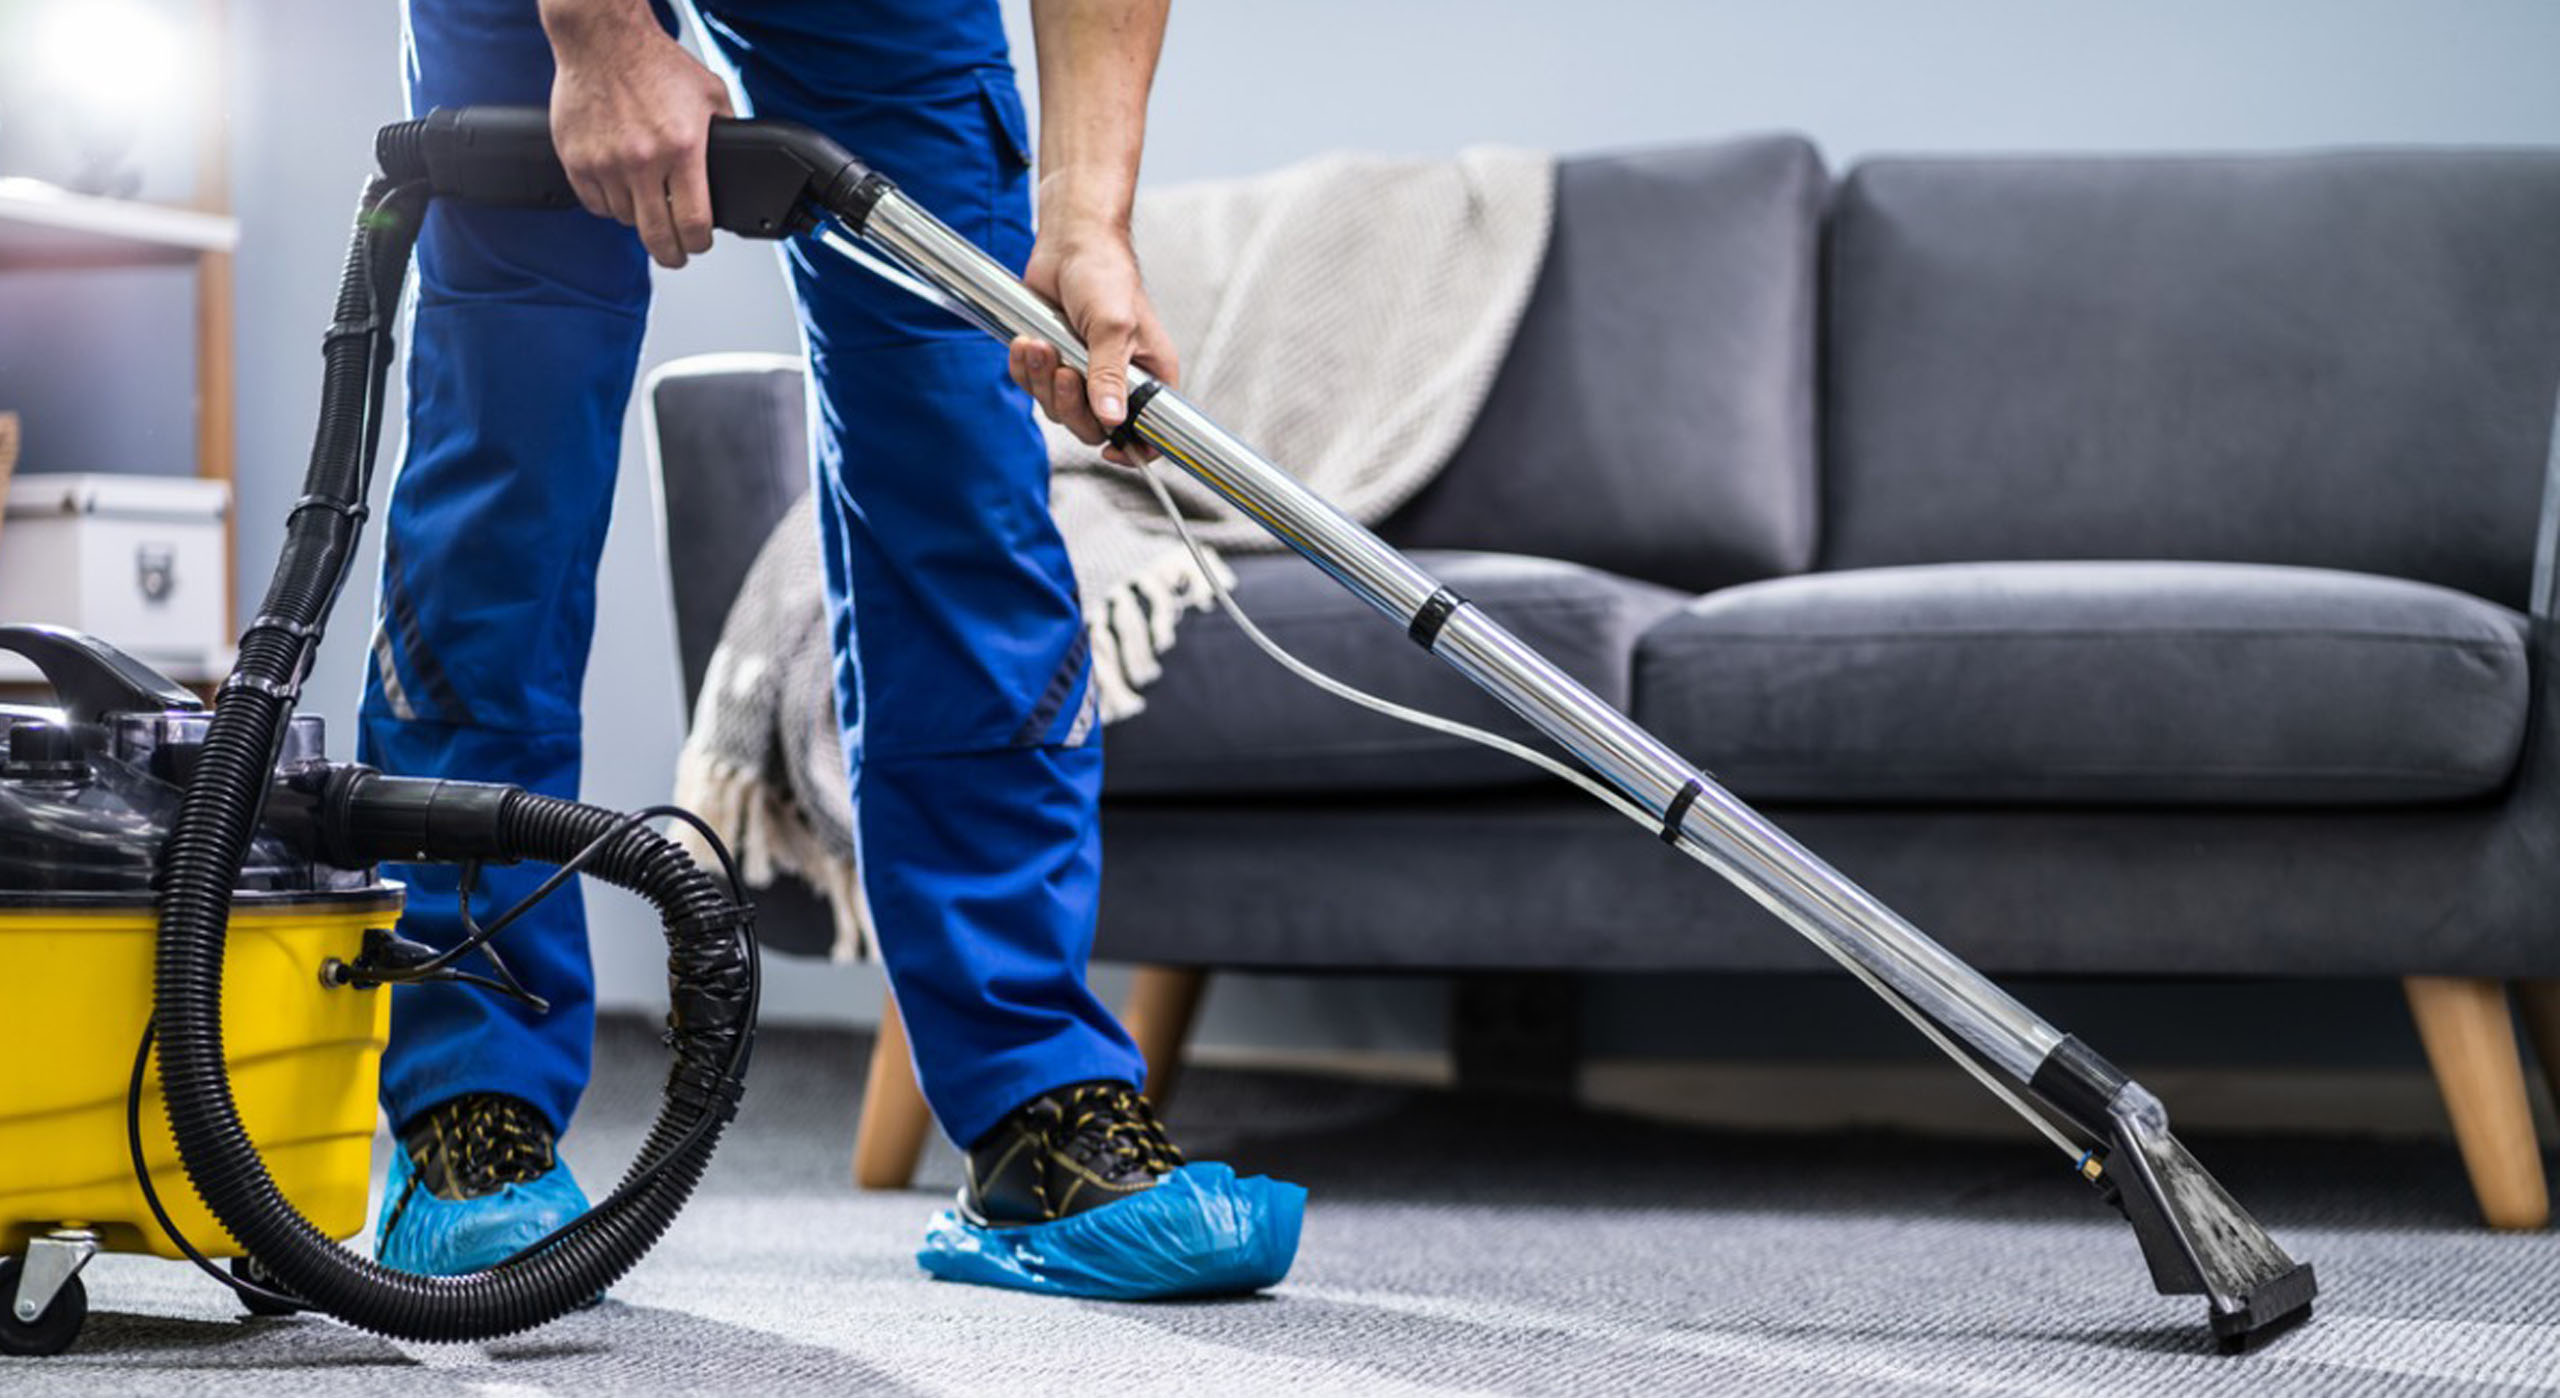 PROFESSIONAL OFFICE CLEANING AGENCY IN BRISBANE